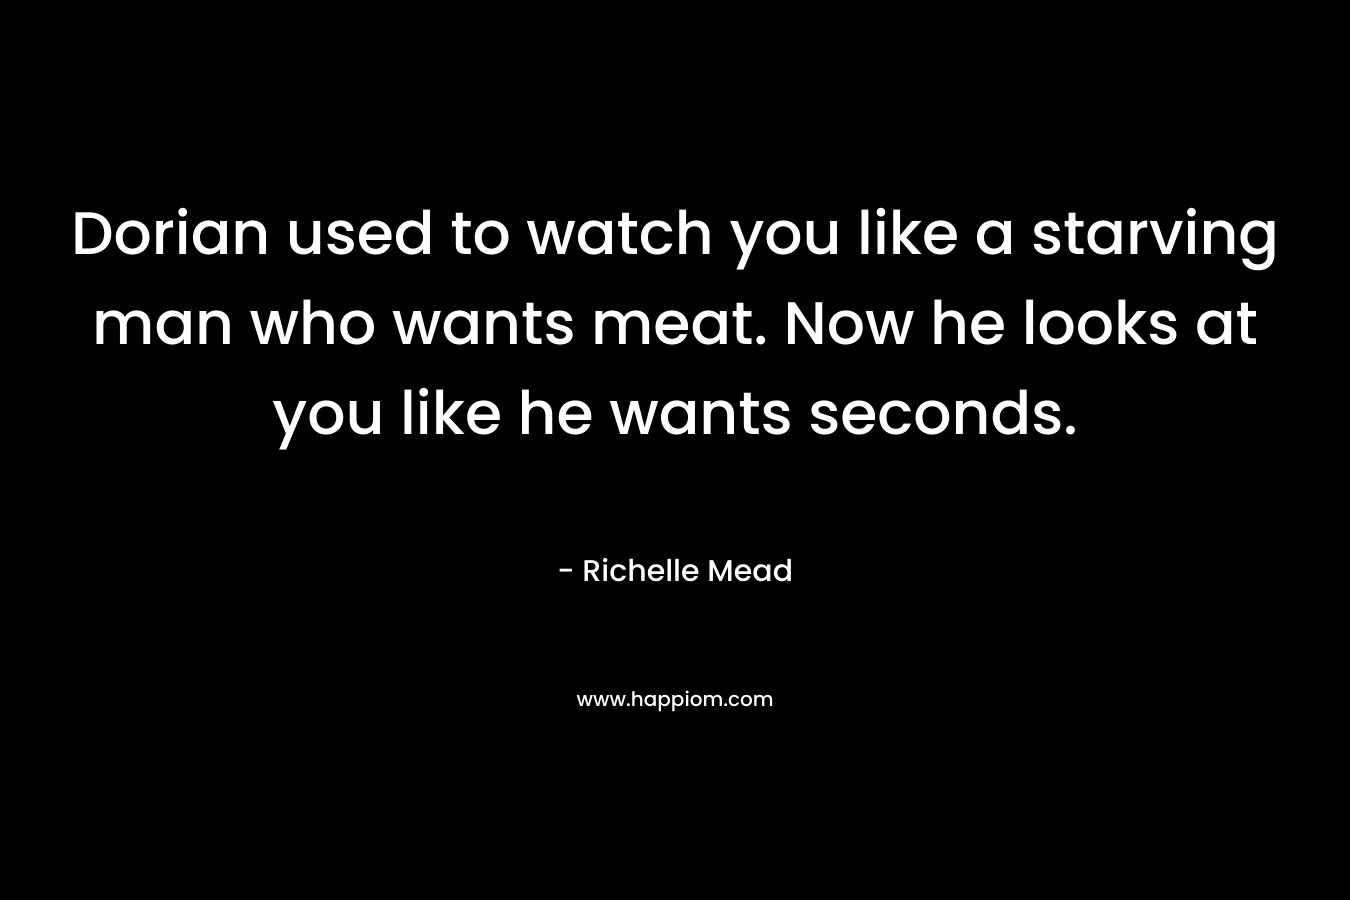 Dorian used to watch you like a starving man who wants meat. Now he looks at you like he wants seconds. – Richelle Mead